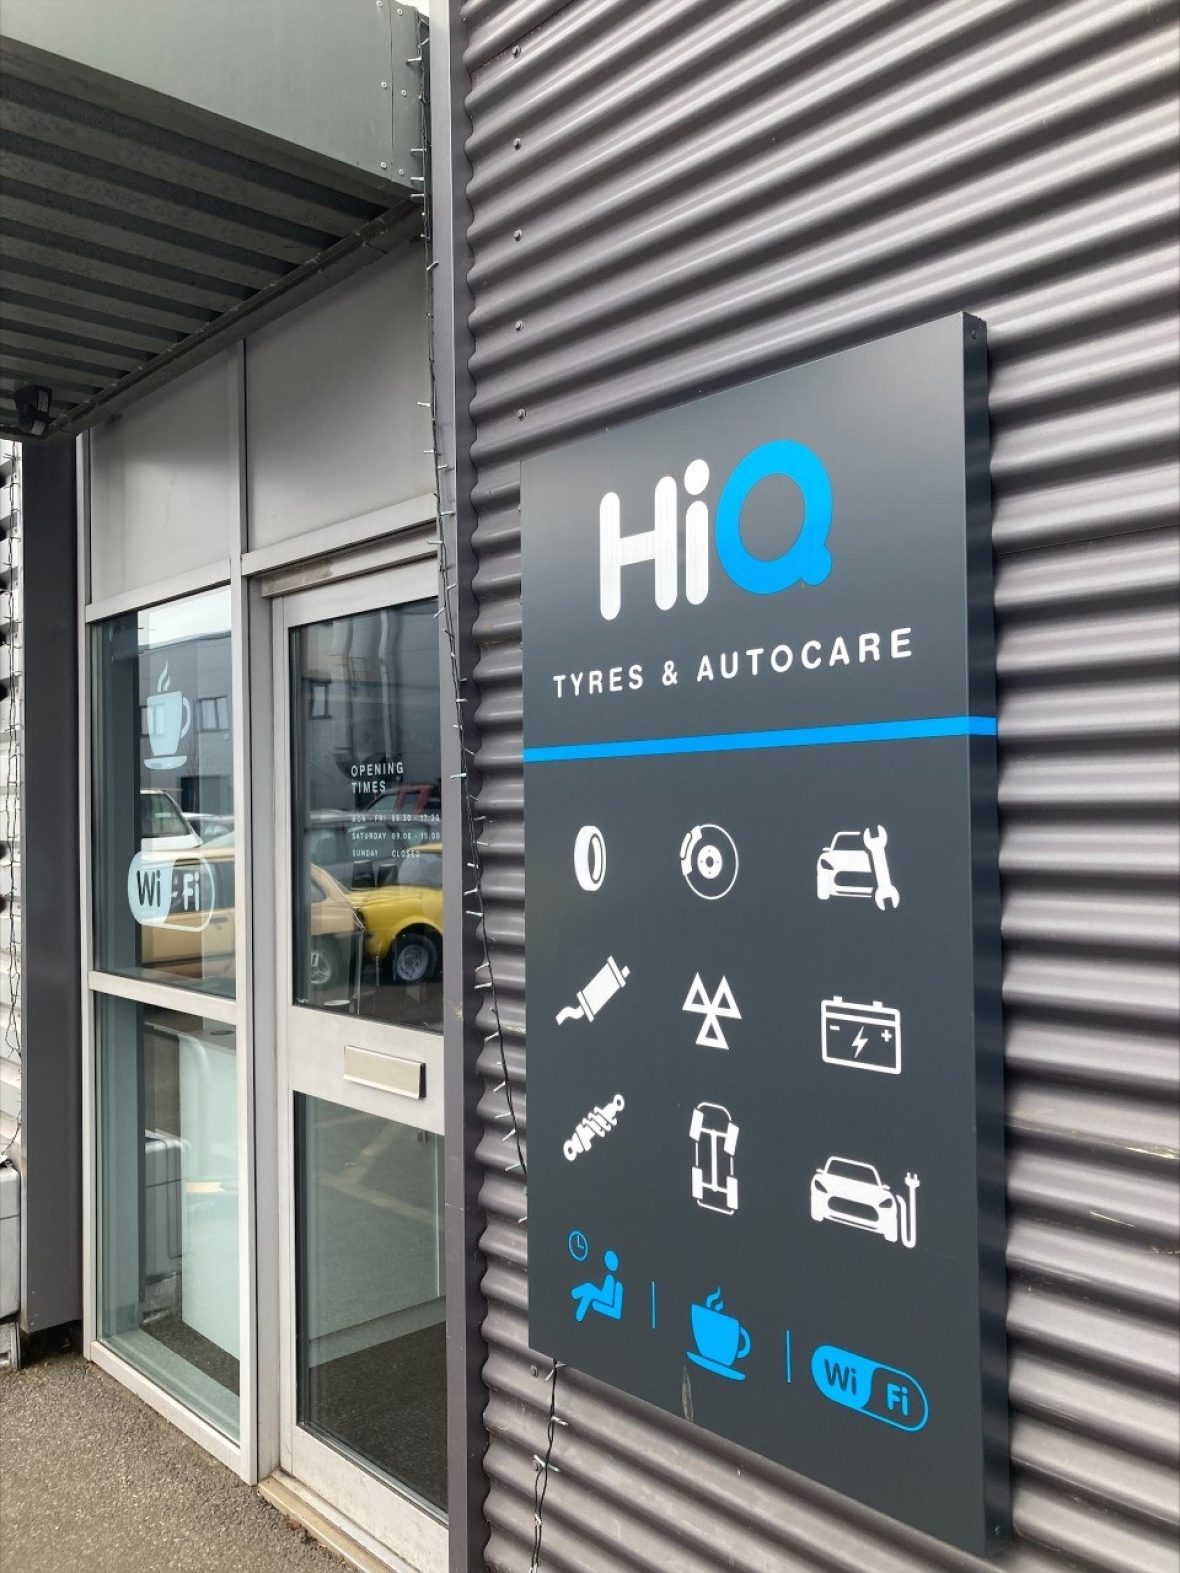 HIQ2 U BANNER 1180x250px Call Now For Mobile Tyre Fitting